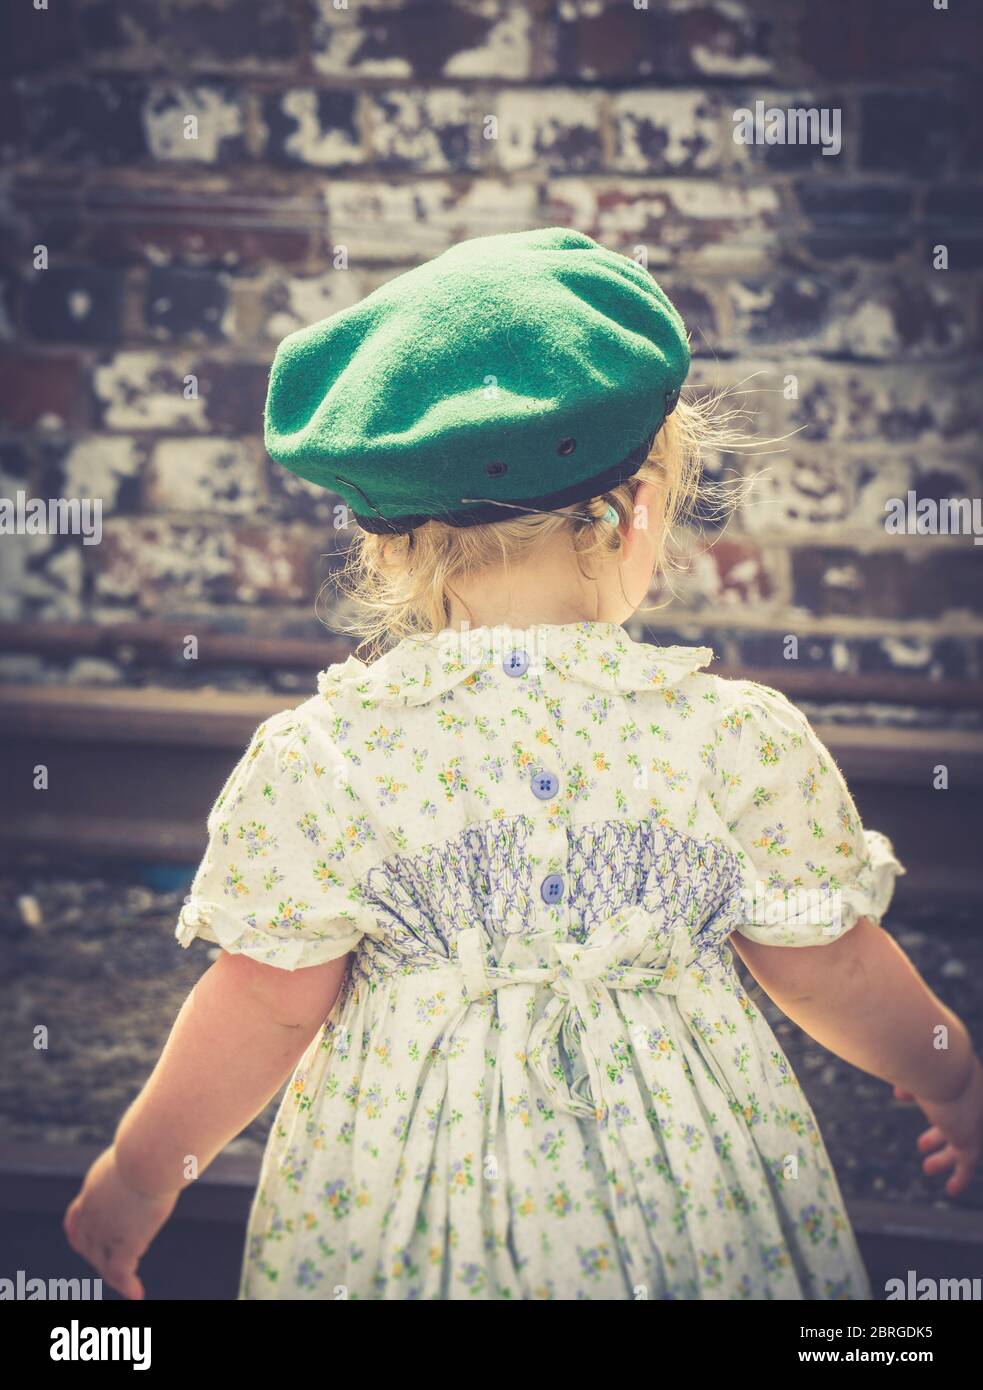 Rear view of cute little girl dressed in 1940s fashion as child of wartime WW2 Britain, 1940s heritage railway summer event. Vintage child from behind. Stock Photo